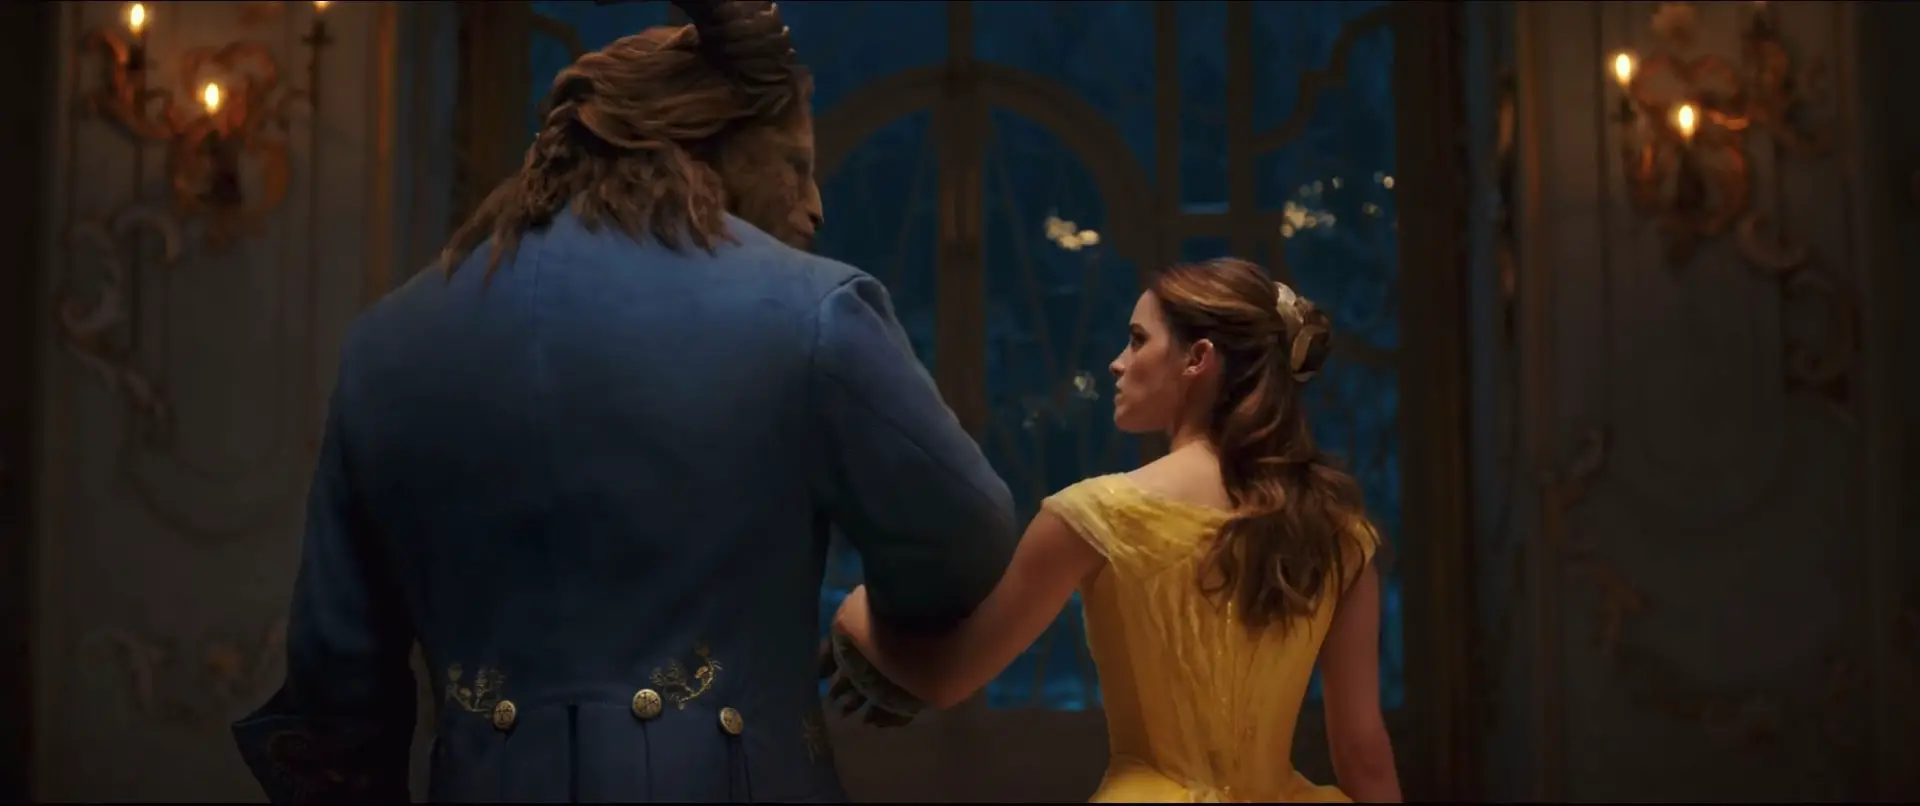 Beauty and the Beast (2017) Download